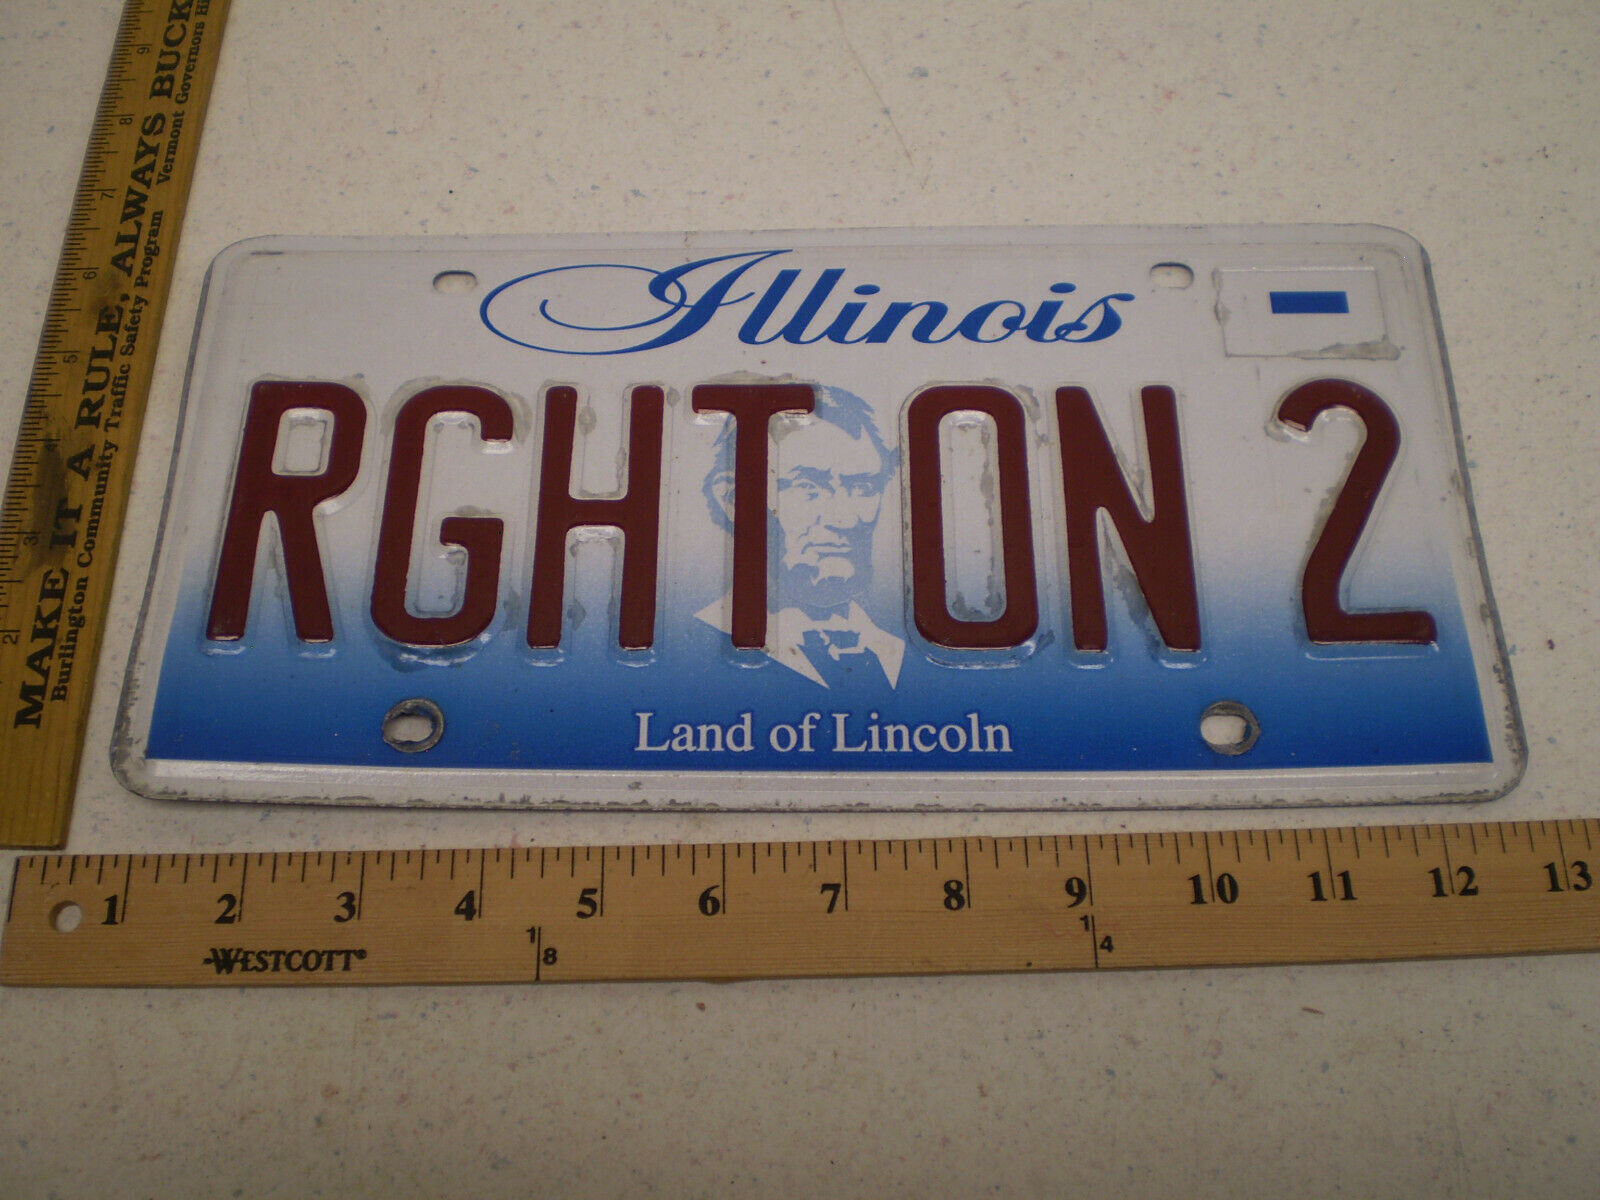 Illinois Il Vanity License Plate Rght On 2 Right On Slang Yes Agreement Support